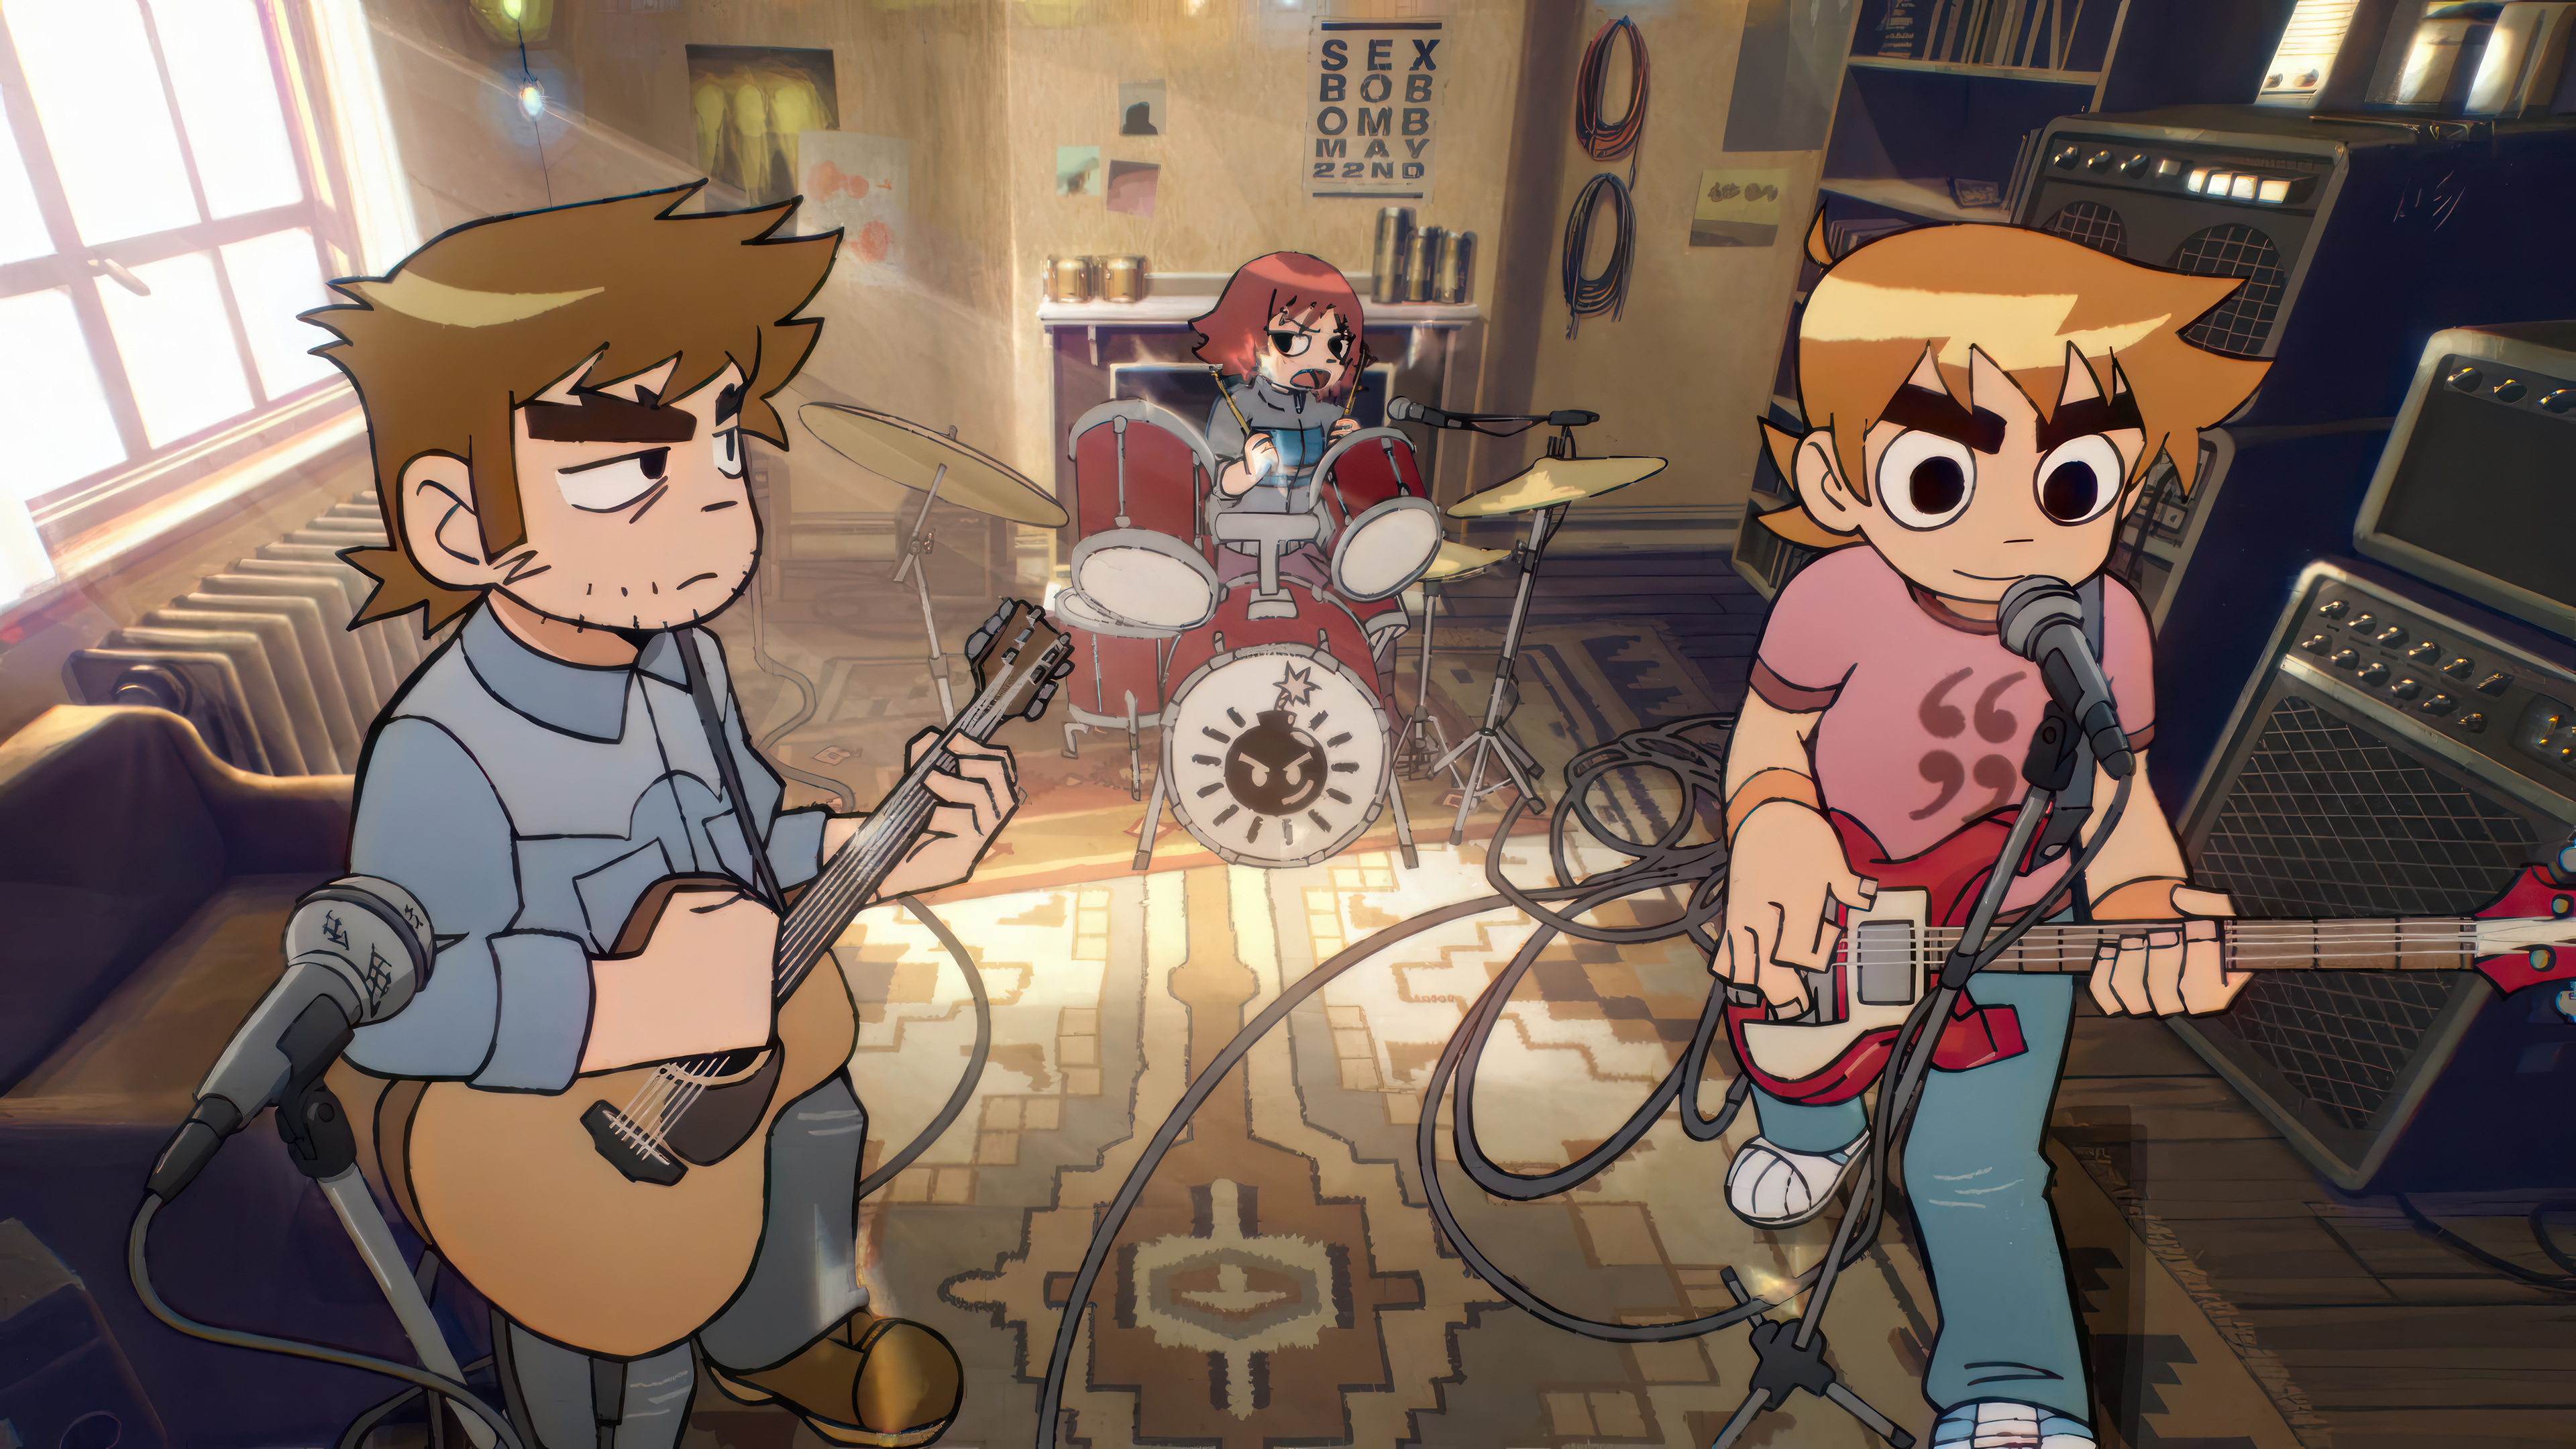 HD wallpaper featuring animated characters Scott Pilgrim and a bandmate rehearsing in a music room from Scott Pilgrim Takes Off.